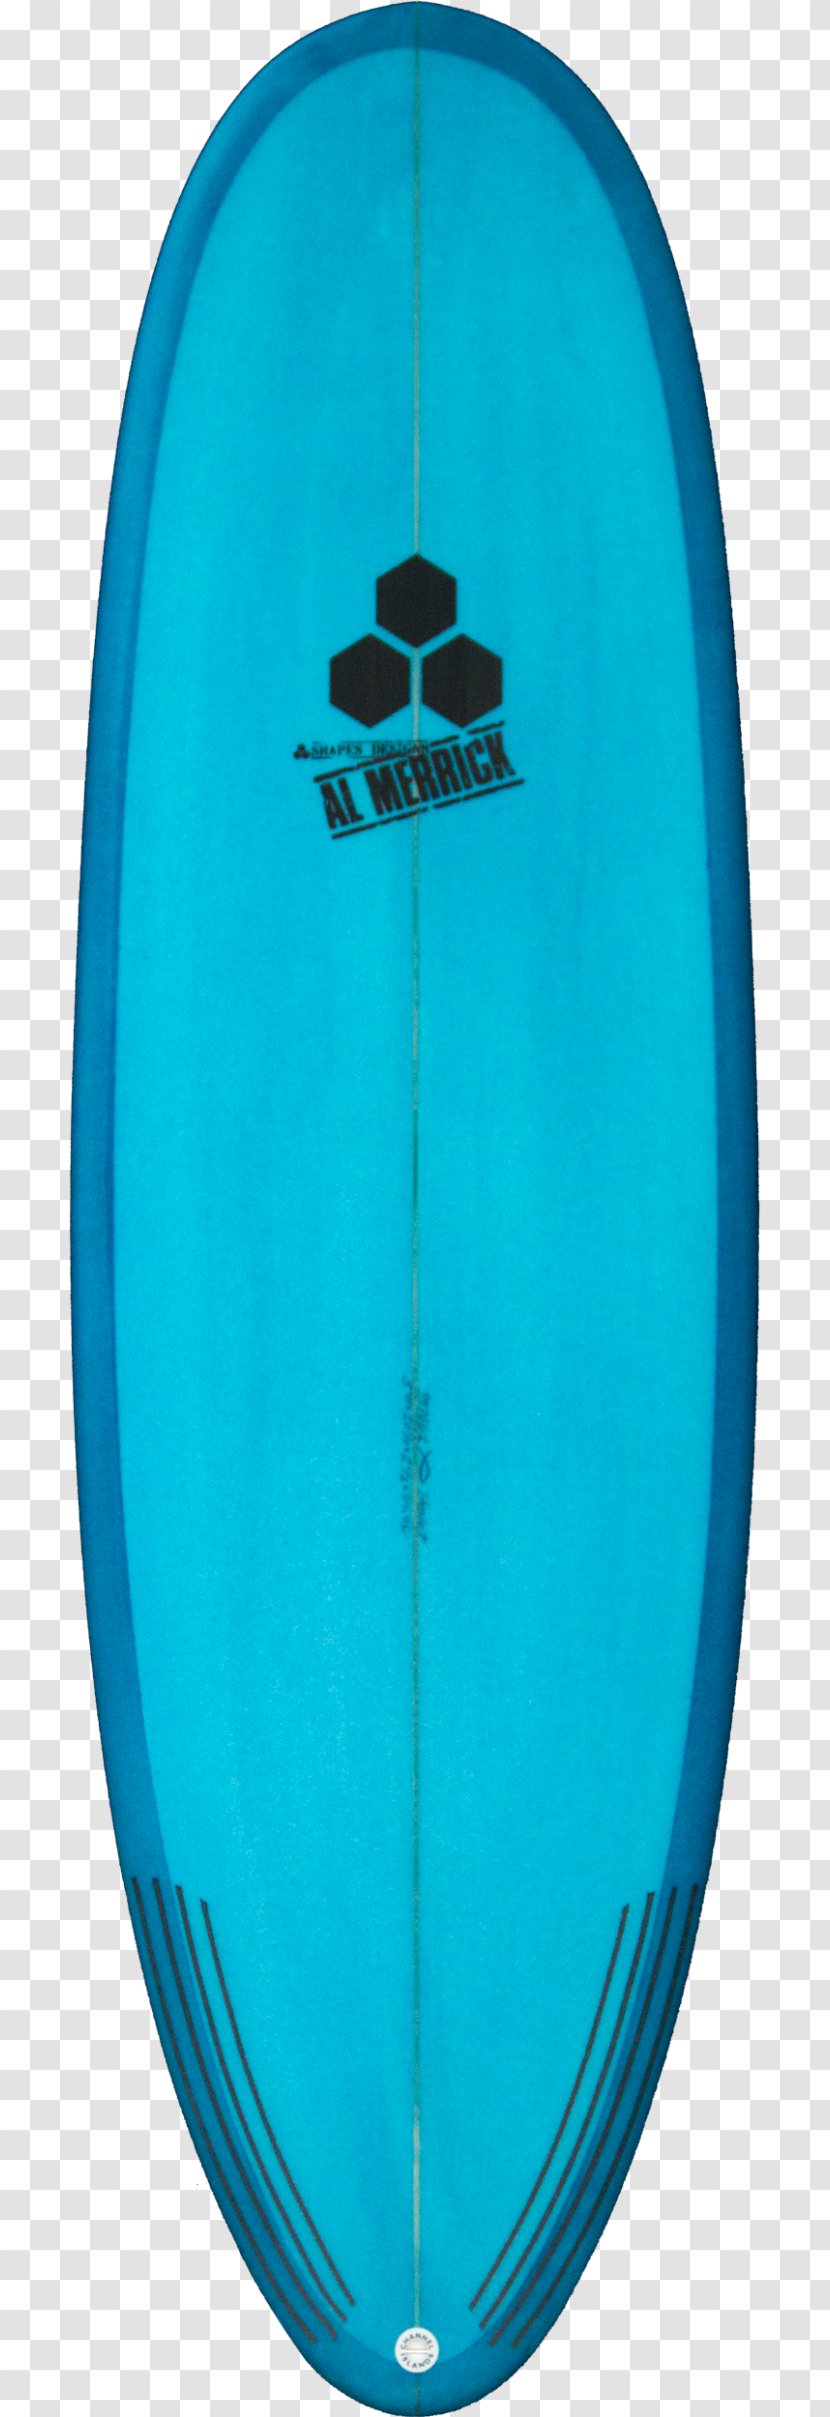 Surfboard Surfing Channel Islands Turquoise Teal - Equipment And Supplies - SURF BOARD Transparent PNG